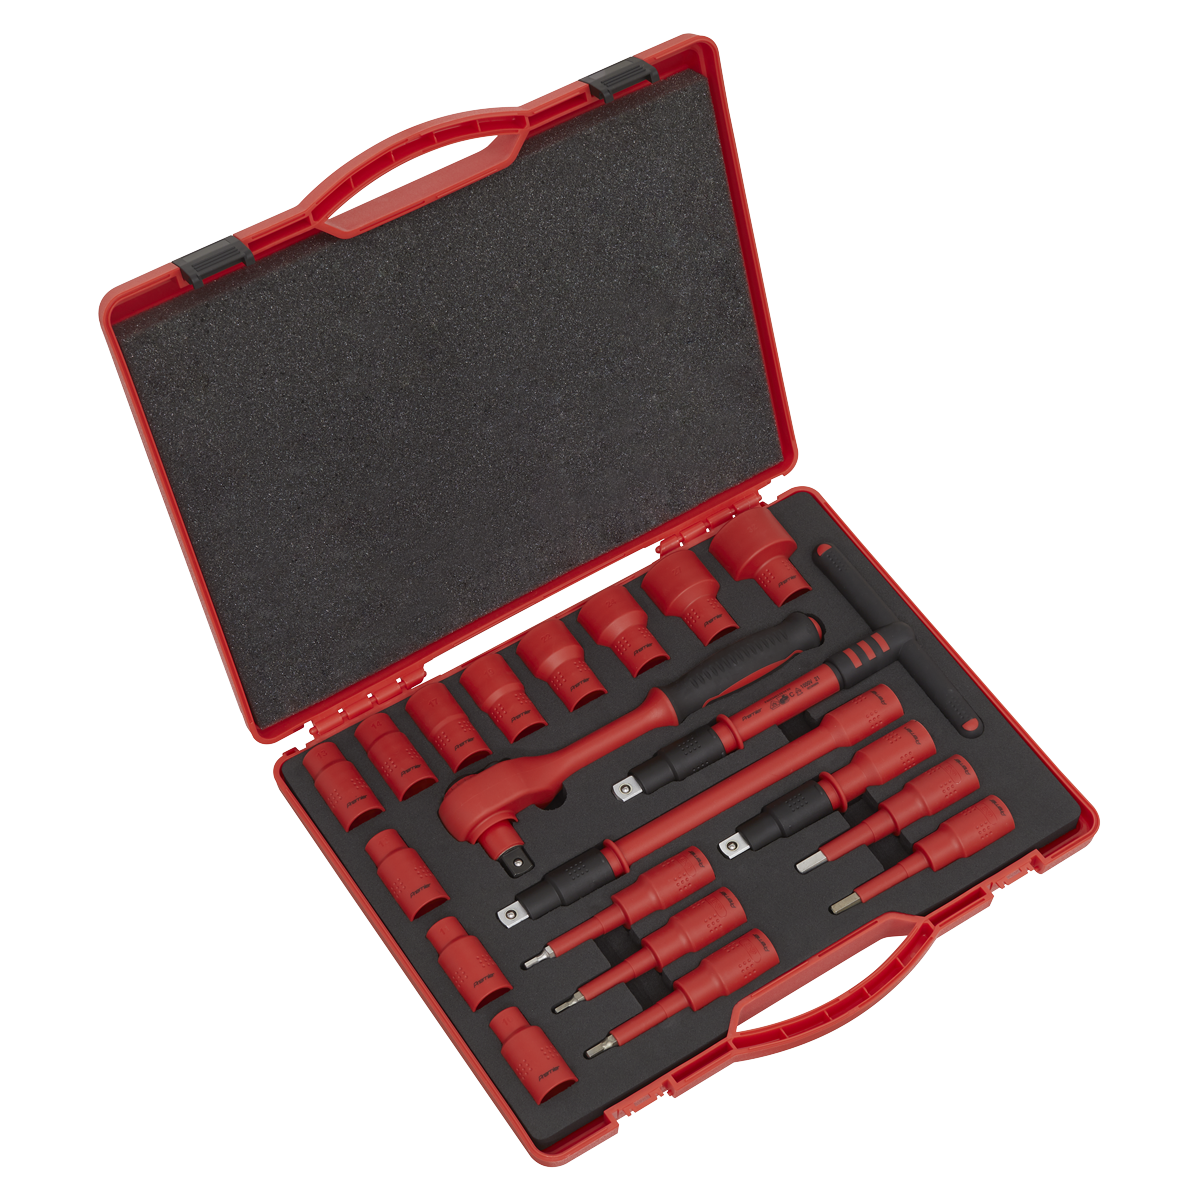 Sealey 20pc 1/2"Sq Drive Insulated Socket Set - VDE Approved AK7941